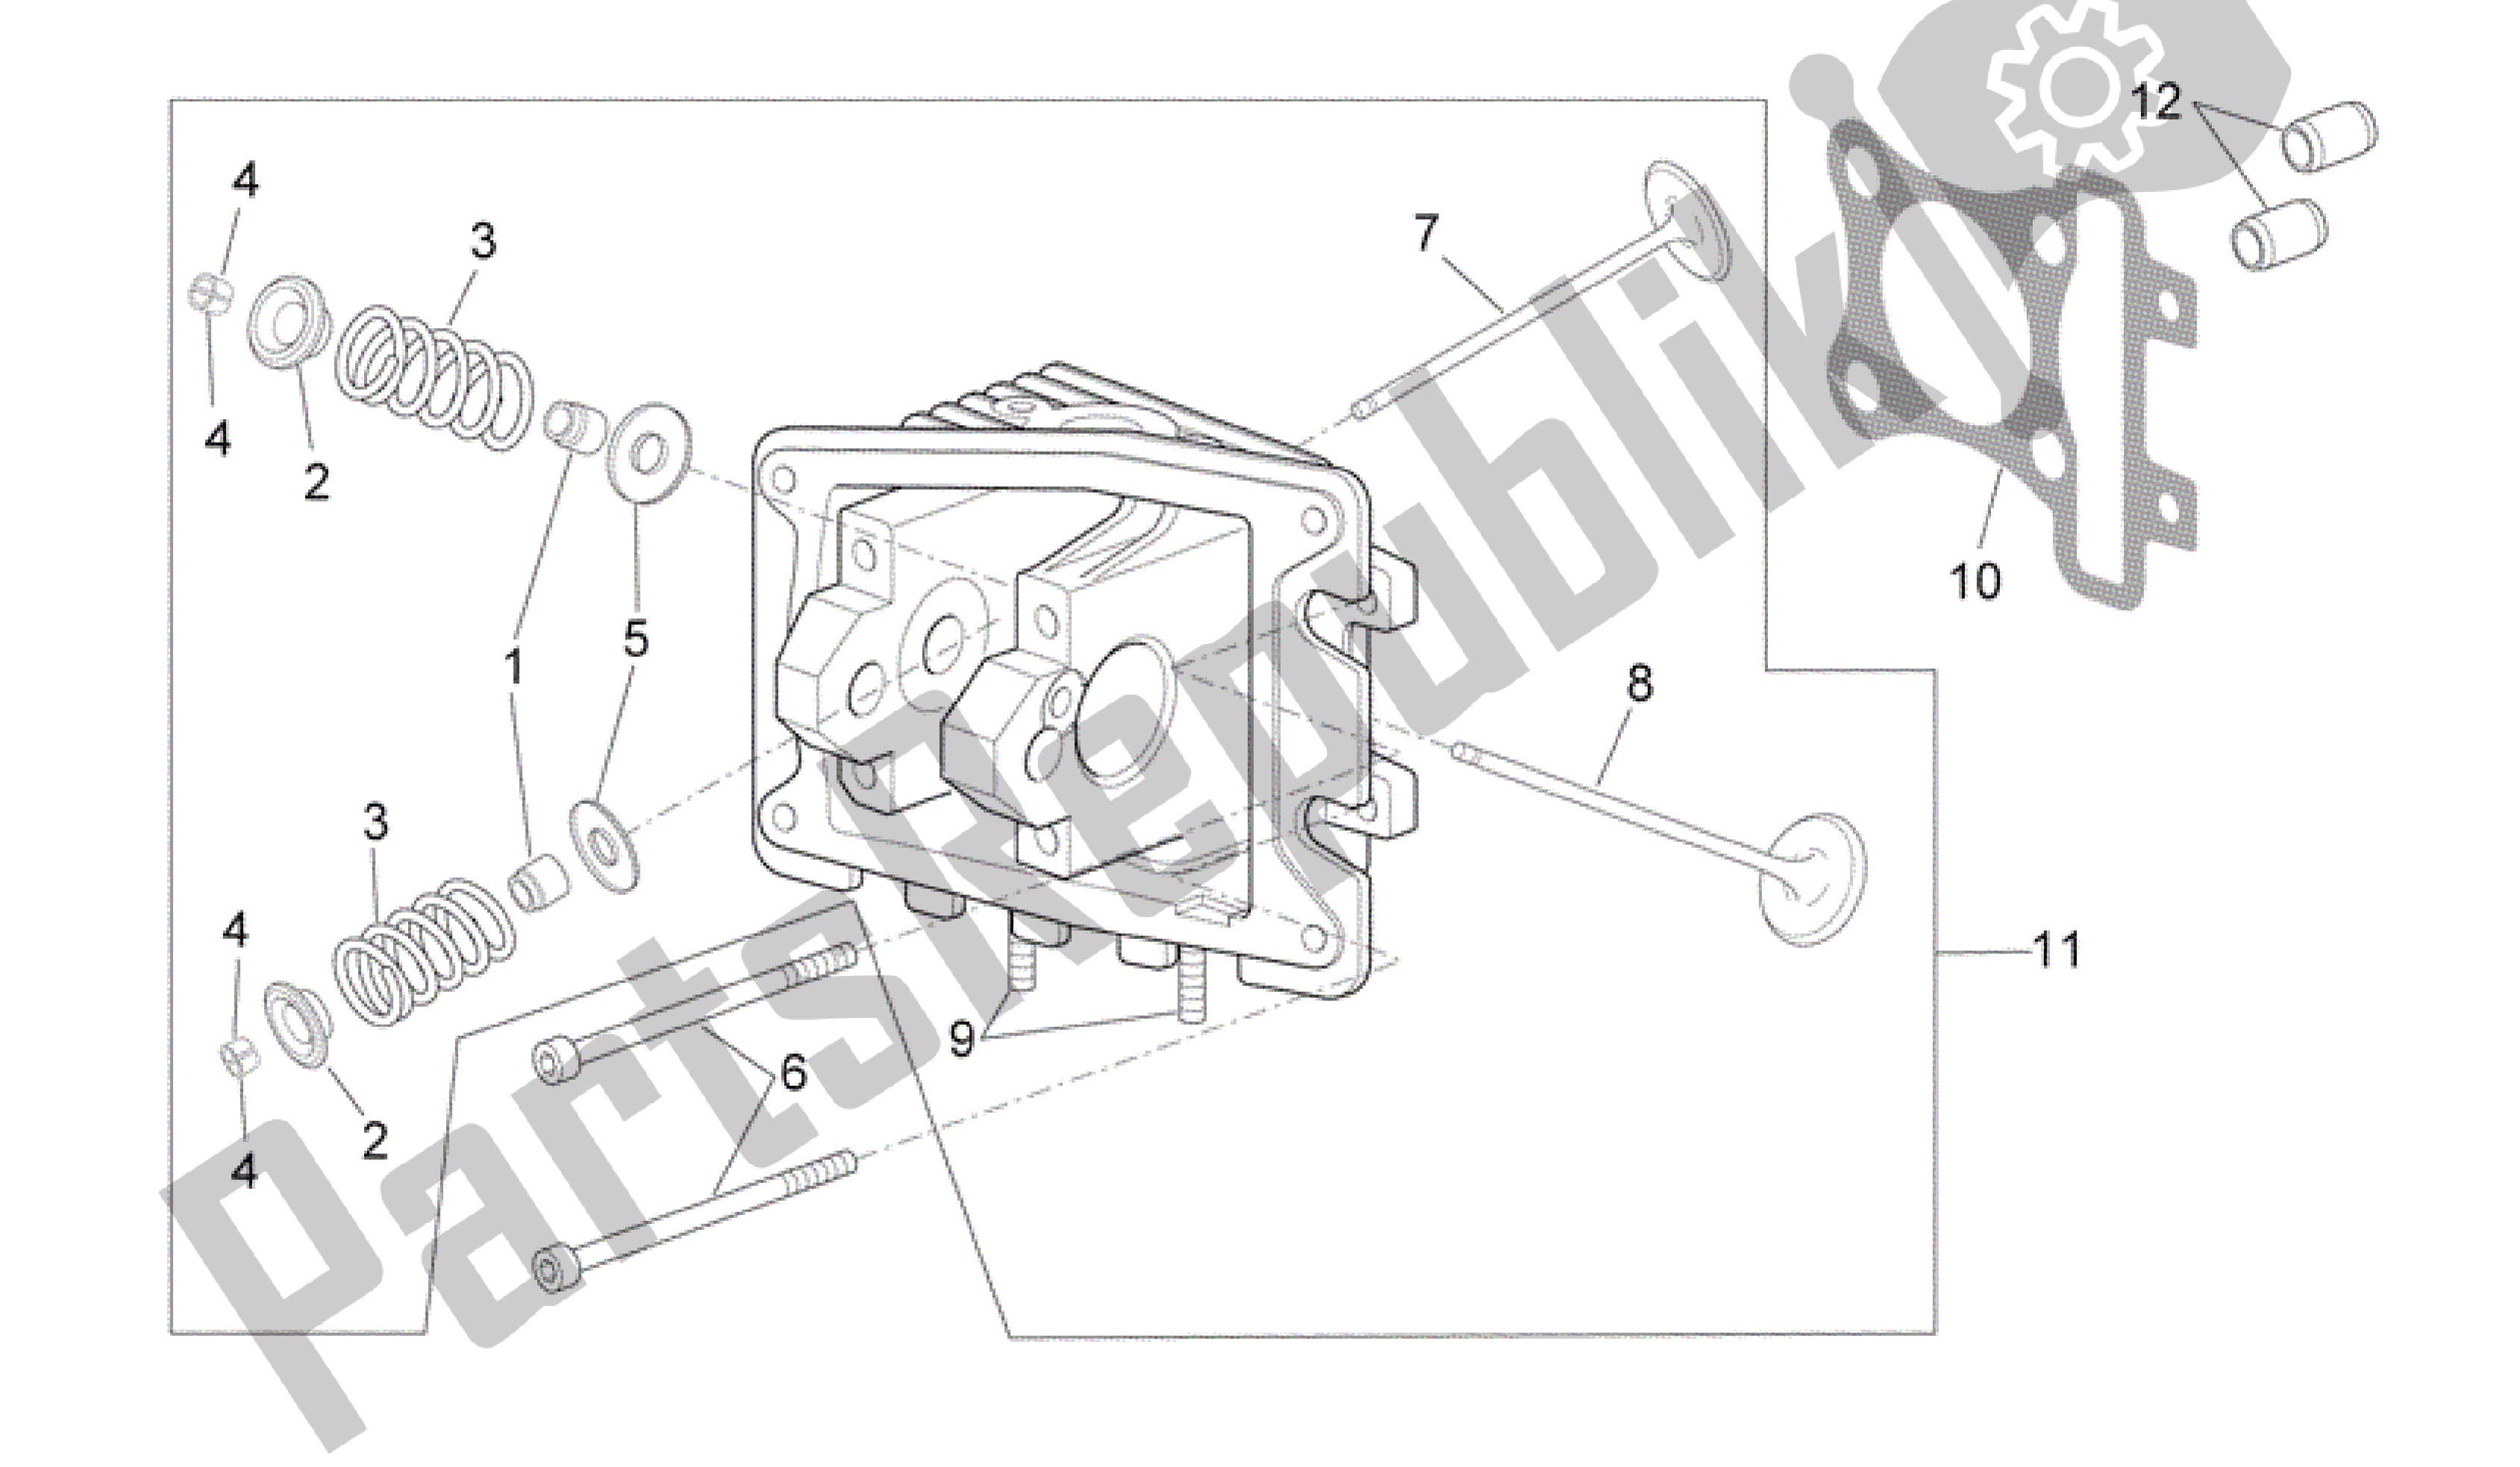 All parts for the Cylinder Head - Valves of the Aprilia Scarabeo 100 2006 - 2009